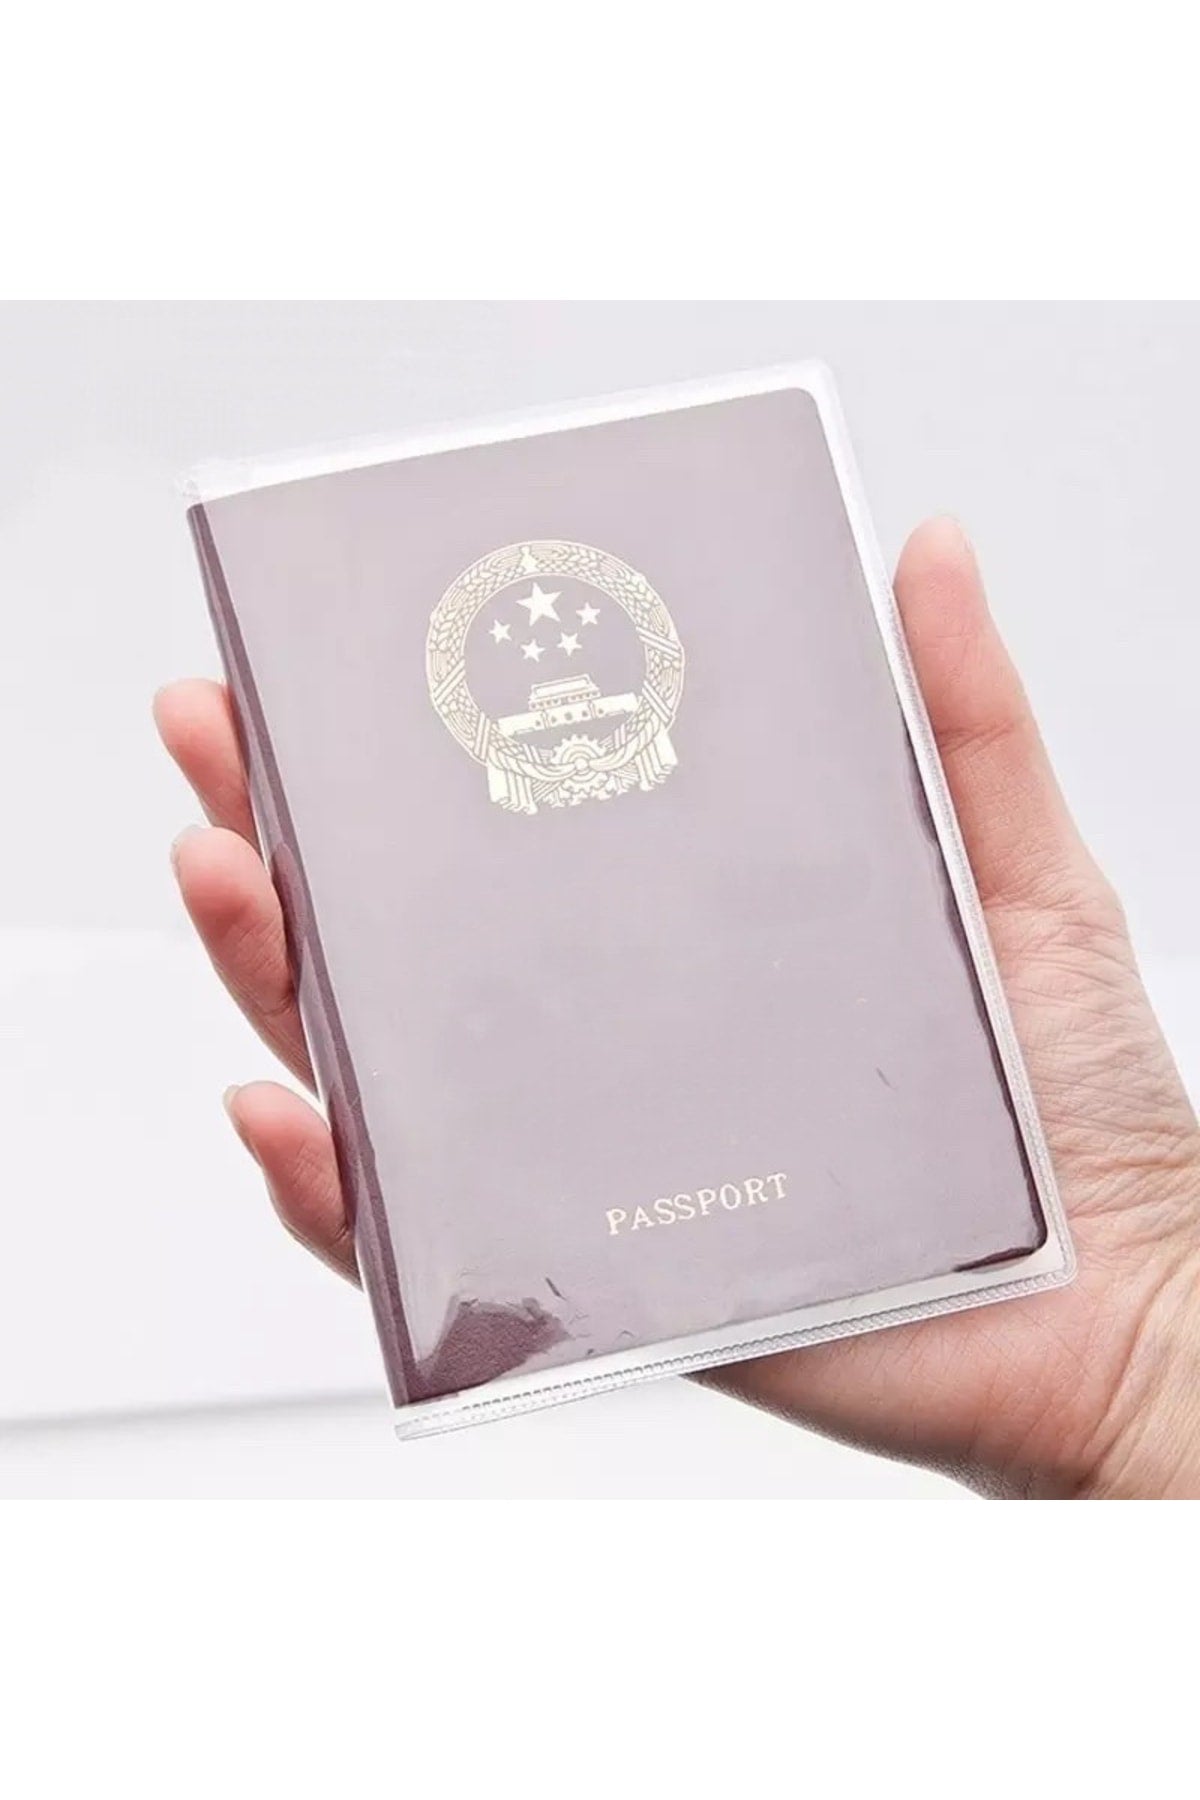 3 Pieces Universal Transparent Passport Protective Cover Model Suitable for All Country Passports - 3 Pieces